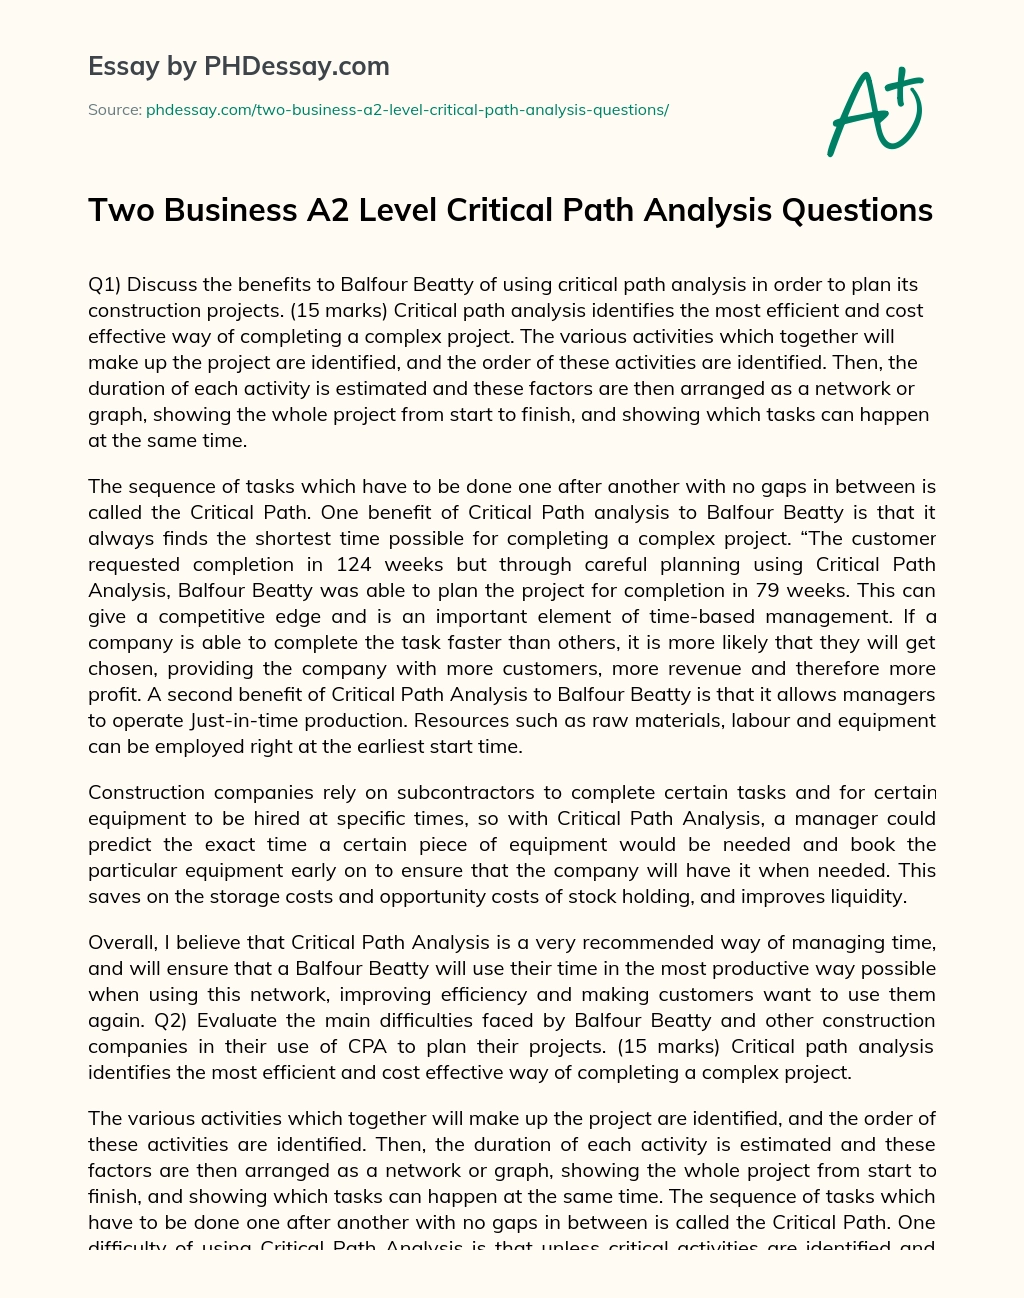 Two Business A2 Level Critical Path Analysis Questions essay